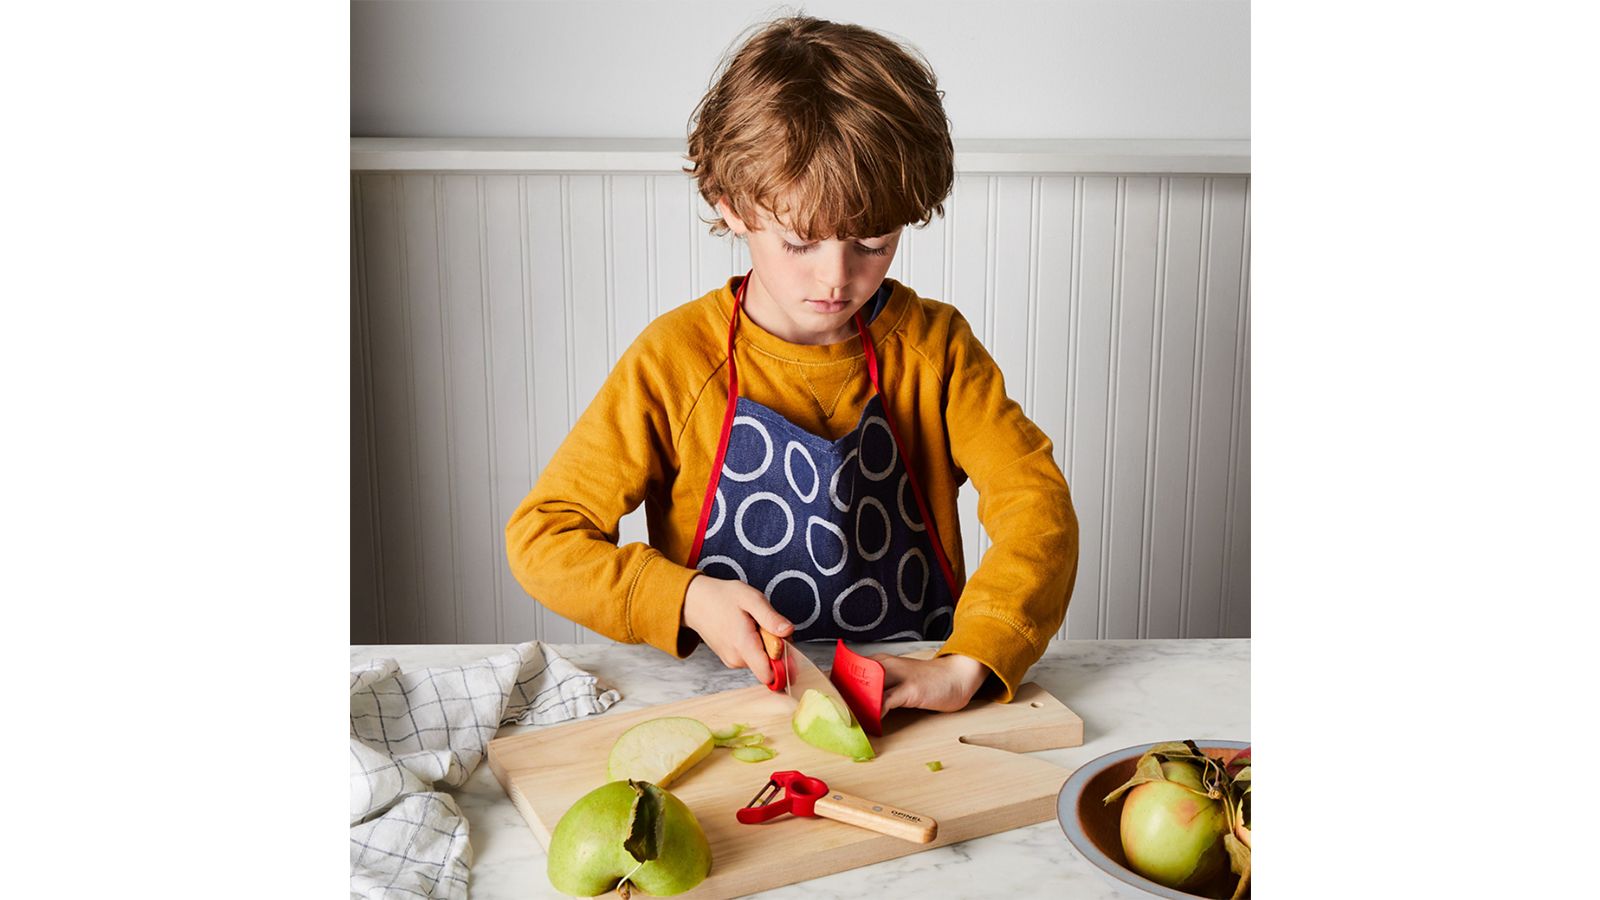 Kids Wooden Cutting Board and Knives Set DIY Children Cooking